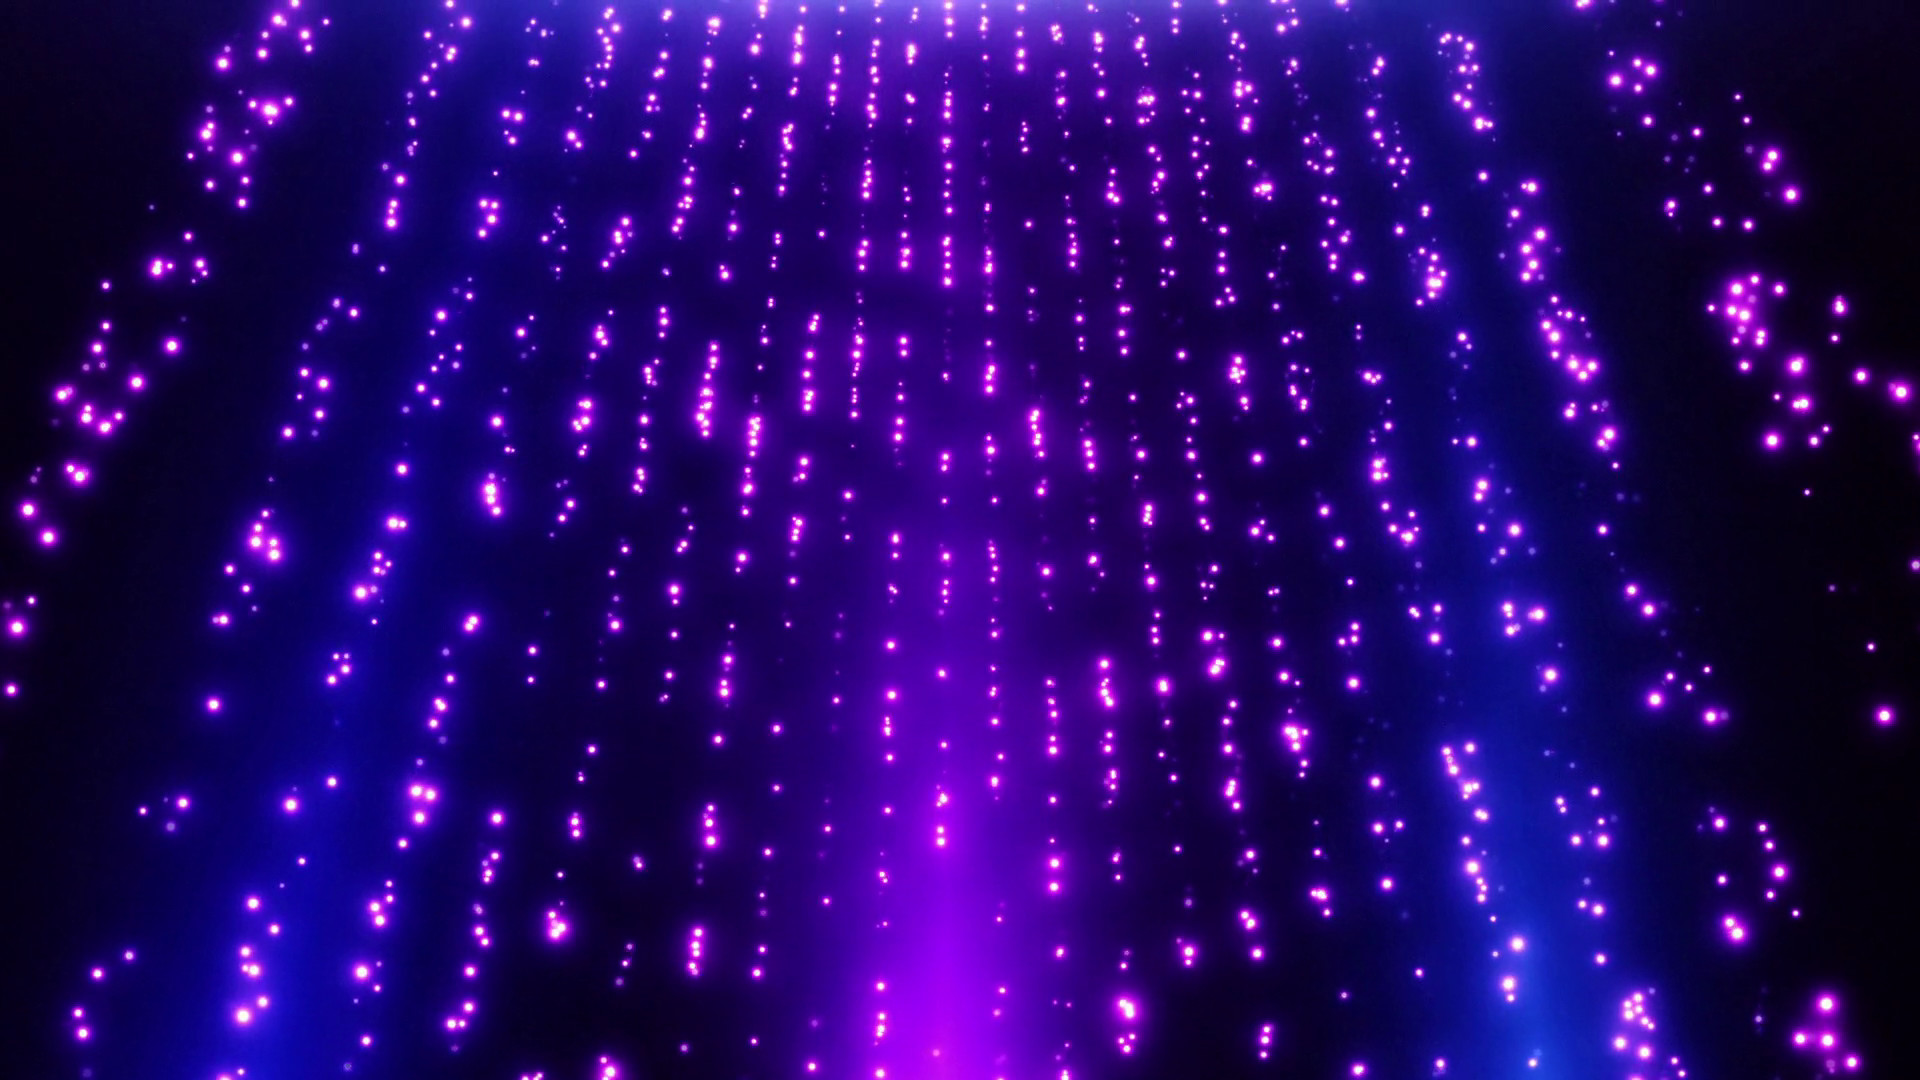 1920x1080 Looped Falling Glowing Dust Particles Motion Background Blue Purple Motion  Background - VideoBlocks